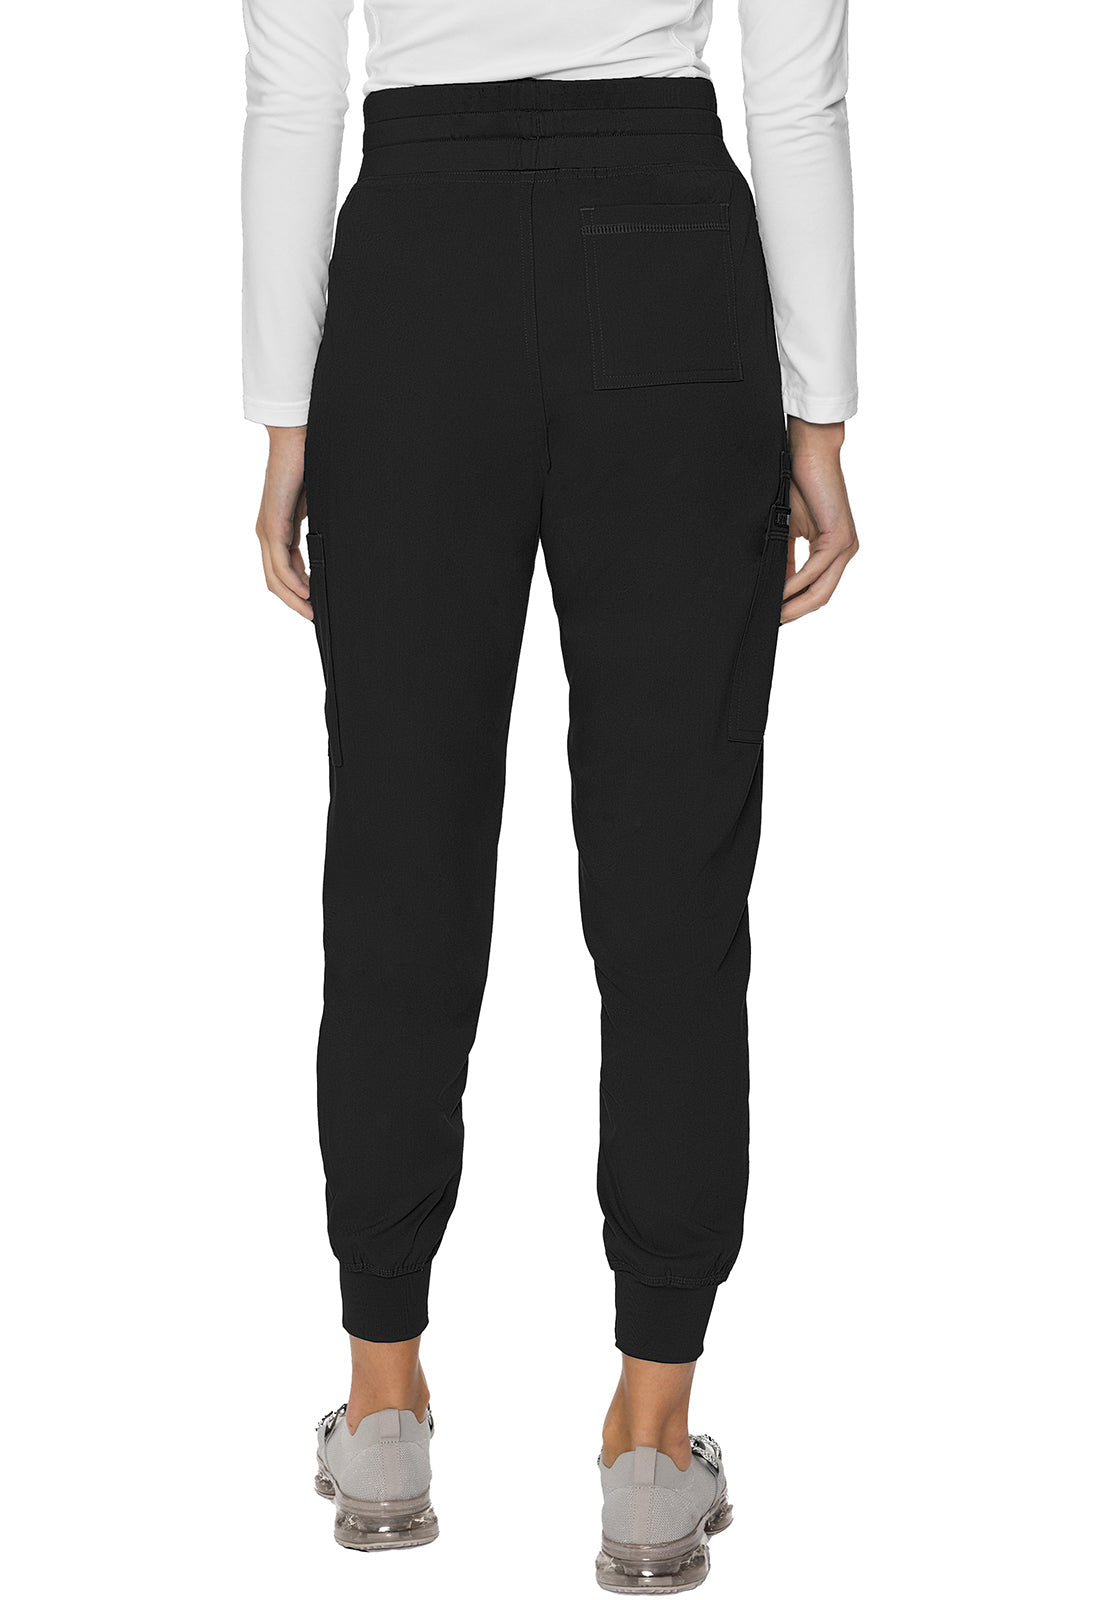 Med Couture Touch 7705 Women's Double Cargo Jogger Pant Black Back